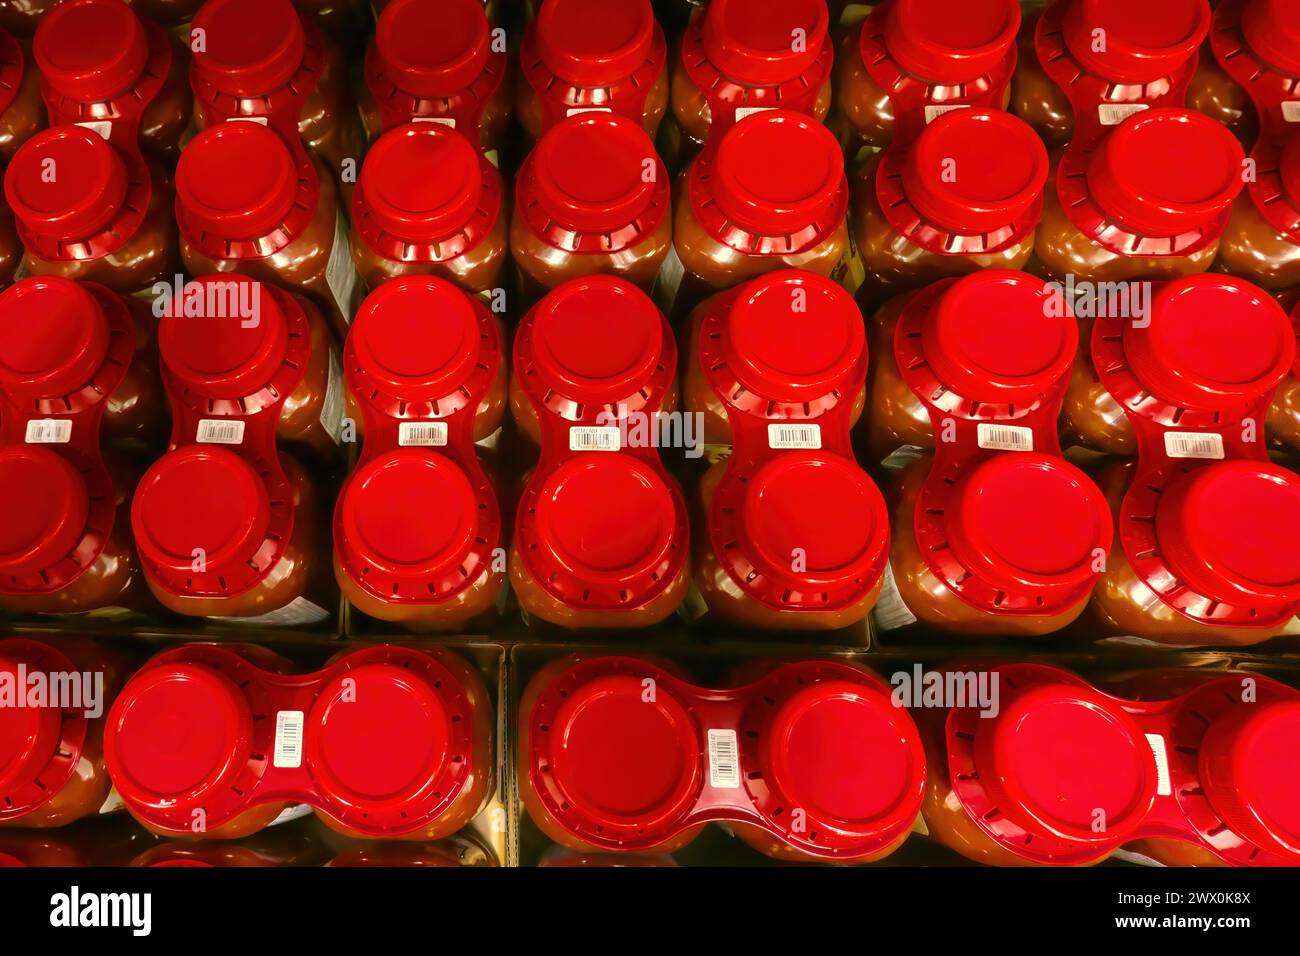 Looking down on red lids of plastic jars of Salsa on a store shelf. Stock Photo